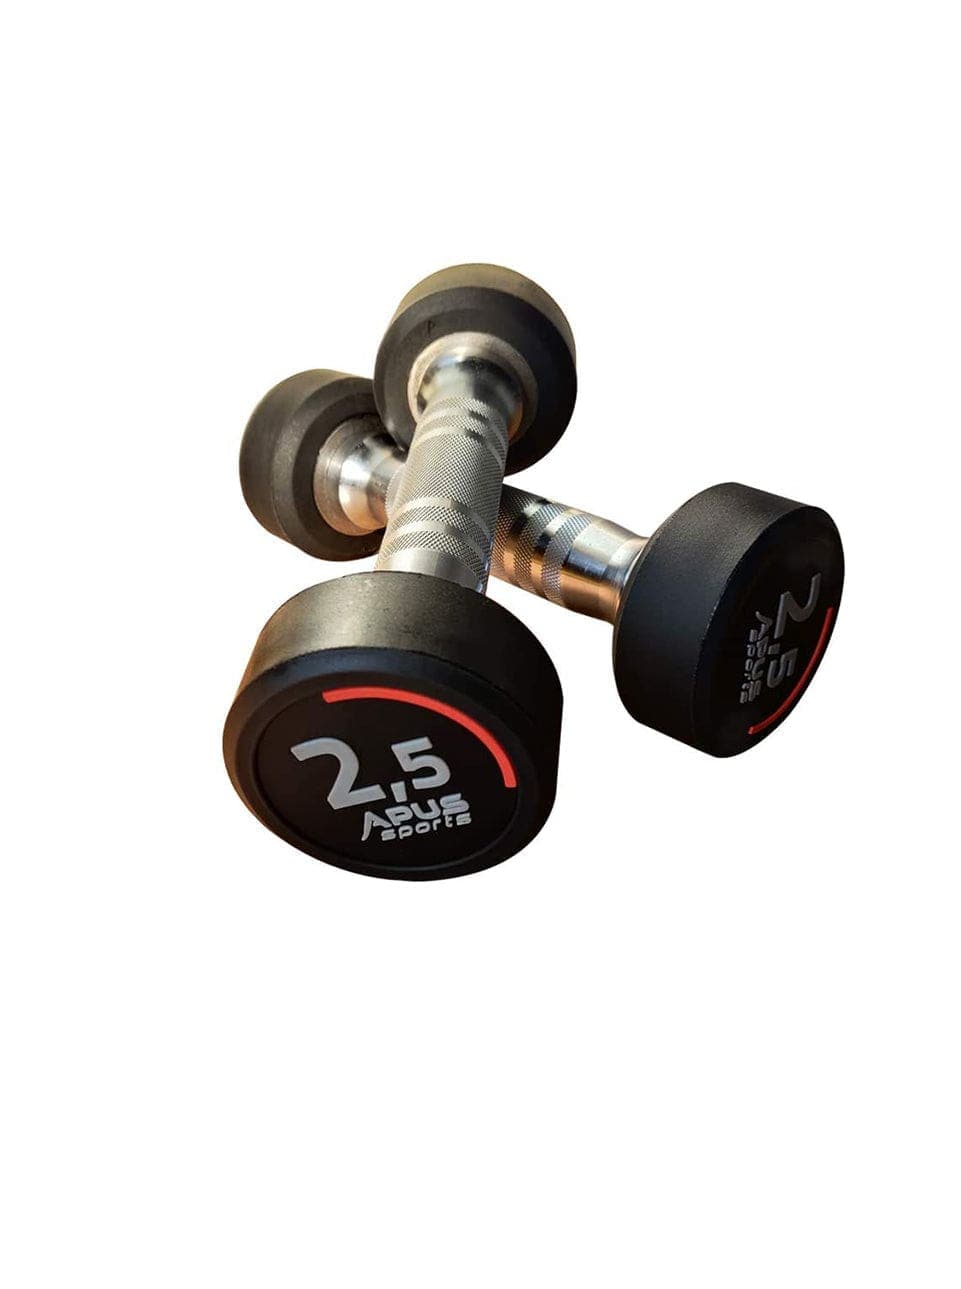 Apus Poland Premium Quality PU Rubber Round Dumbells | 2.5 KG - 25 KG (10 PAIRS) | Commercial and Home Use with 3 Years warranty - Athletix.ae